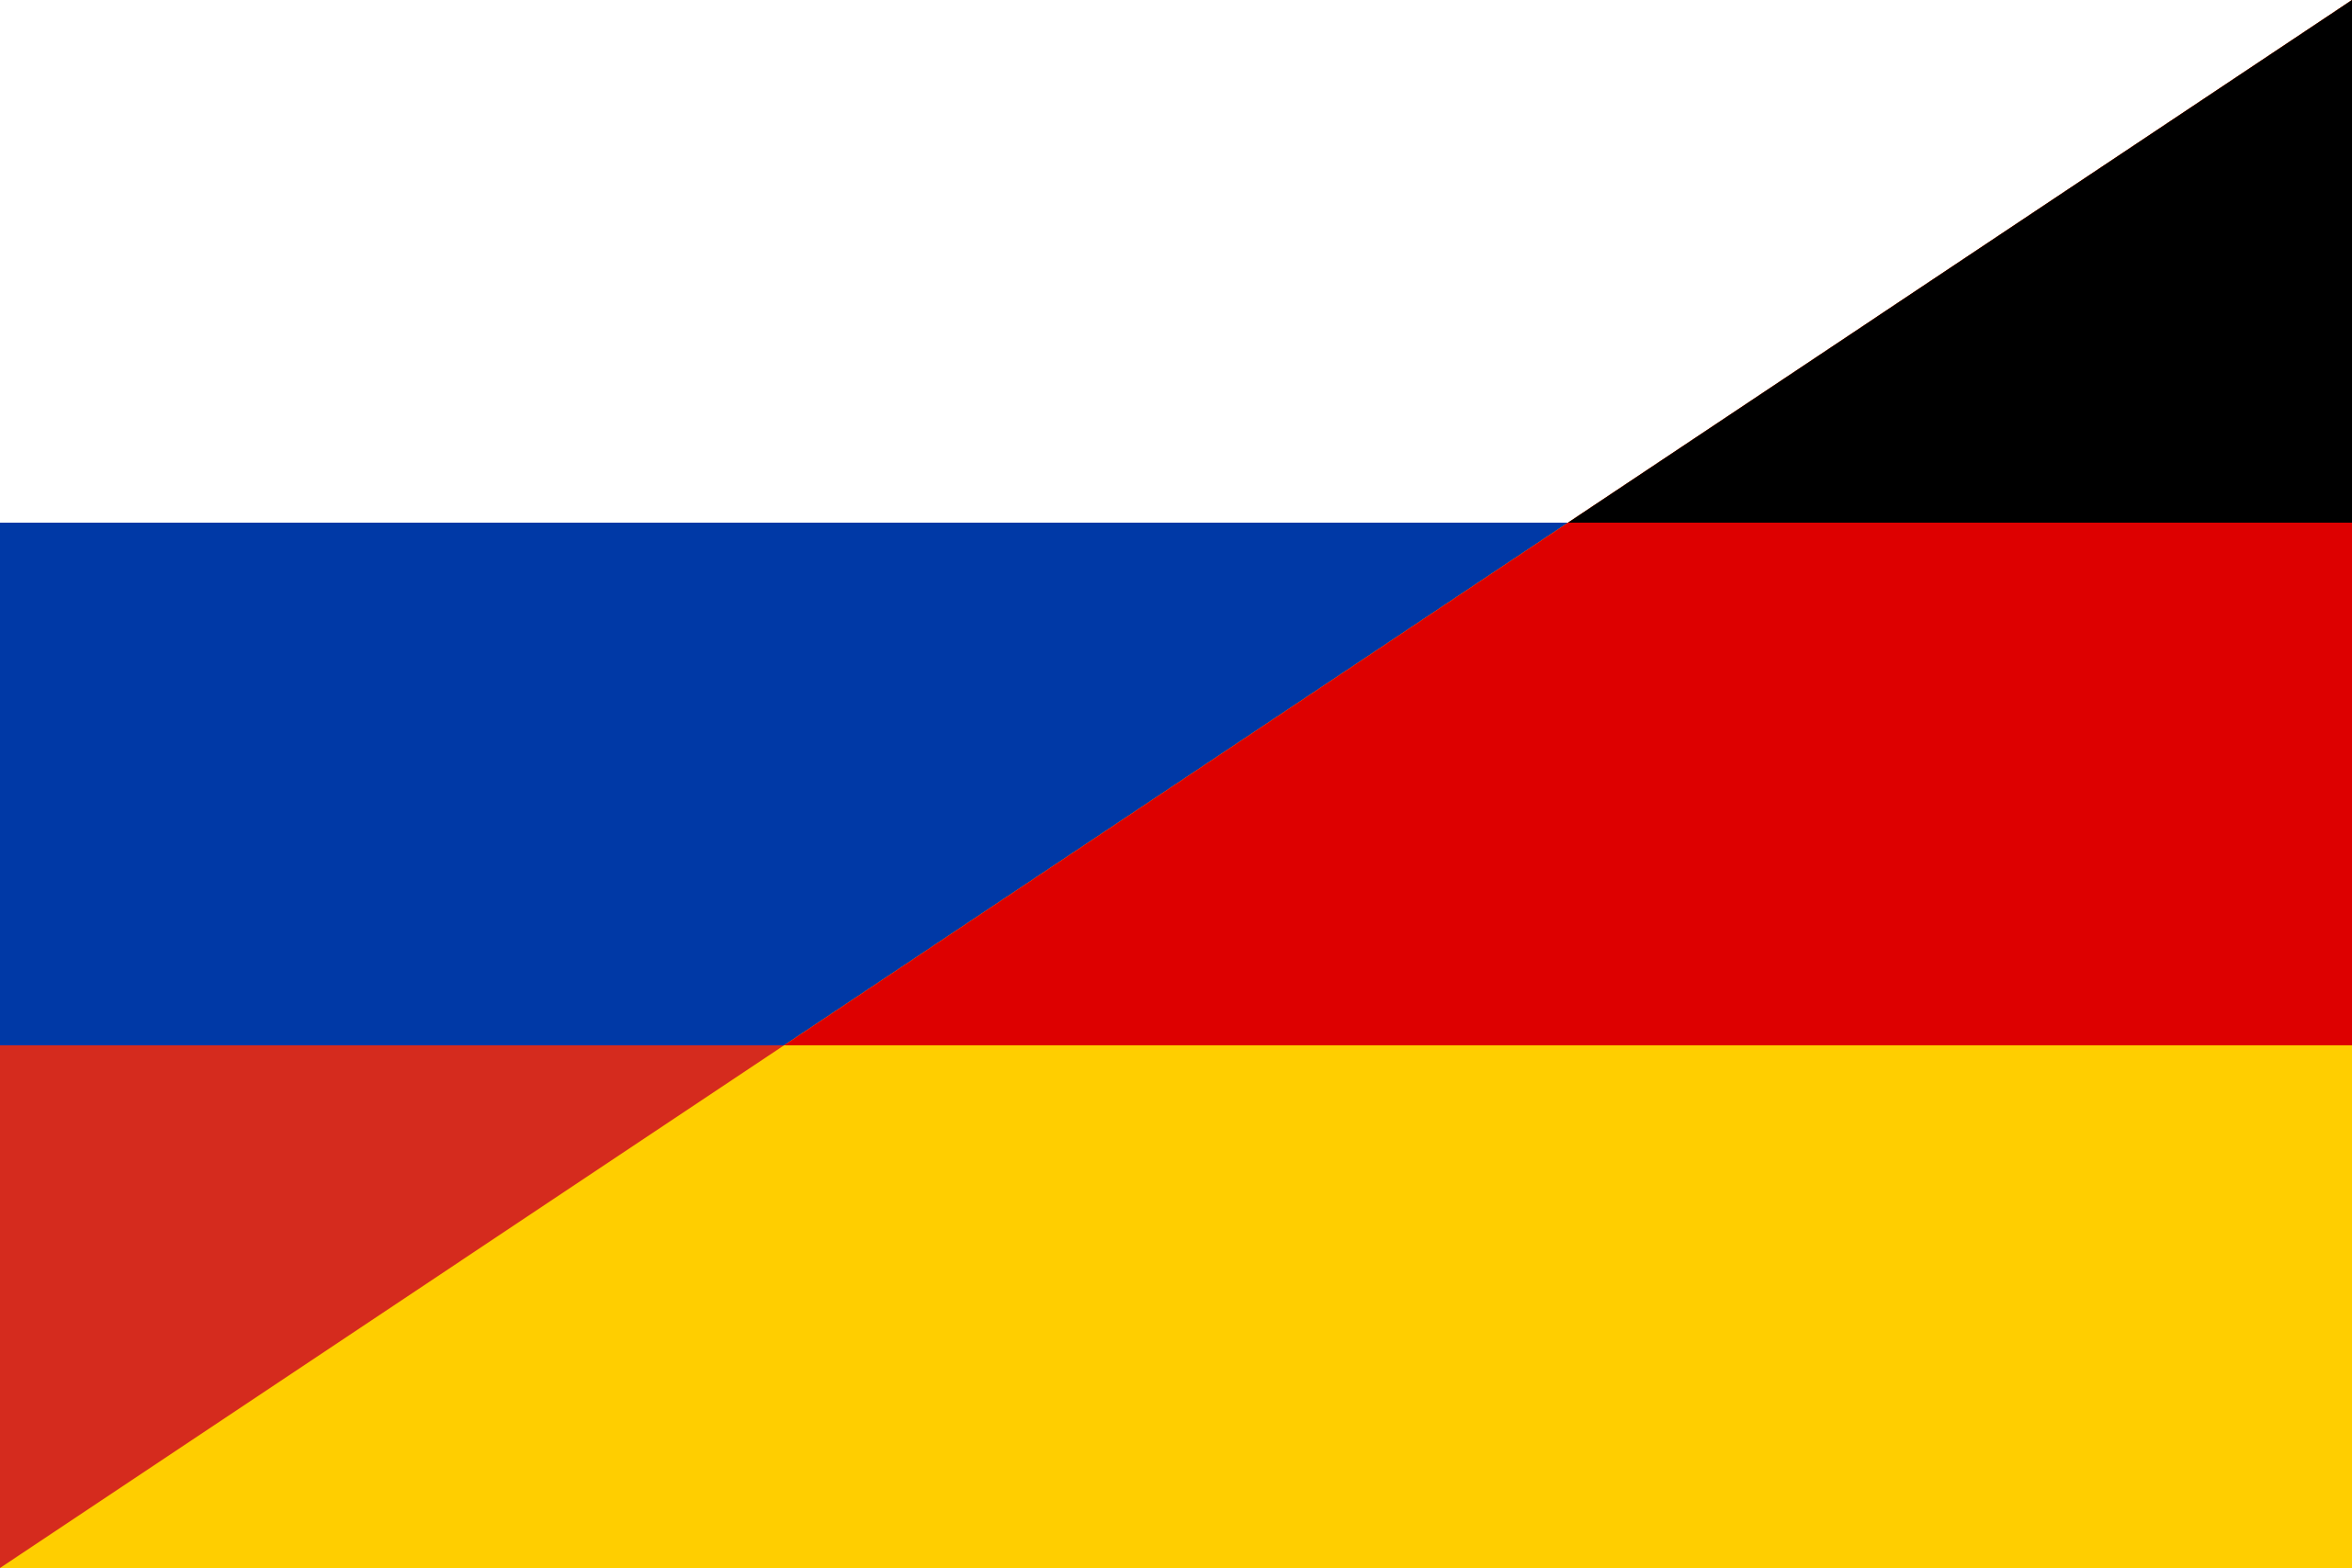 File:German pro-russian flag.png - Wikimedia Commons